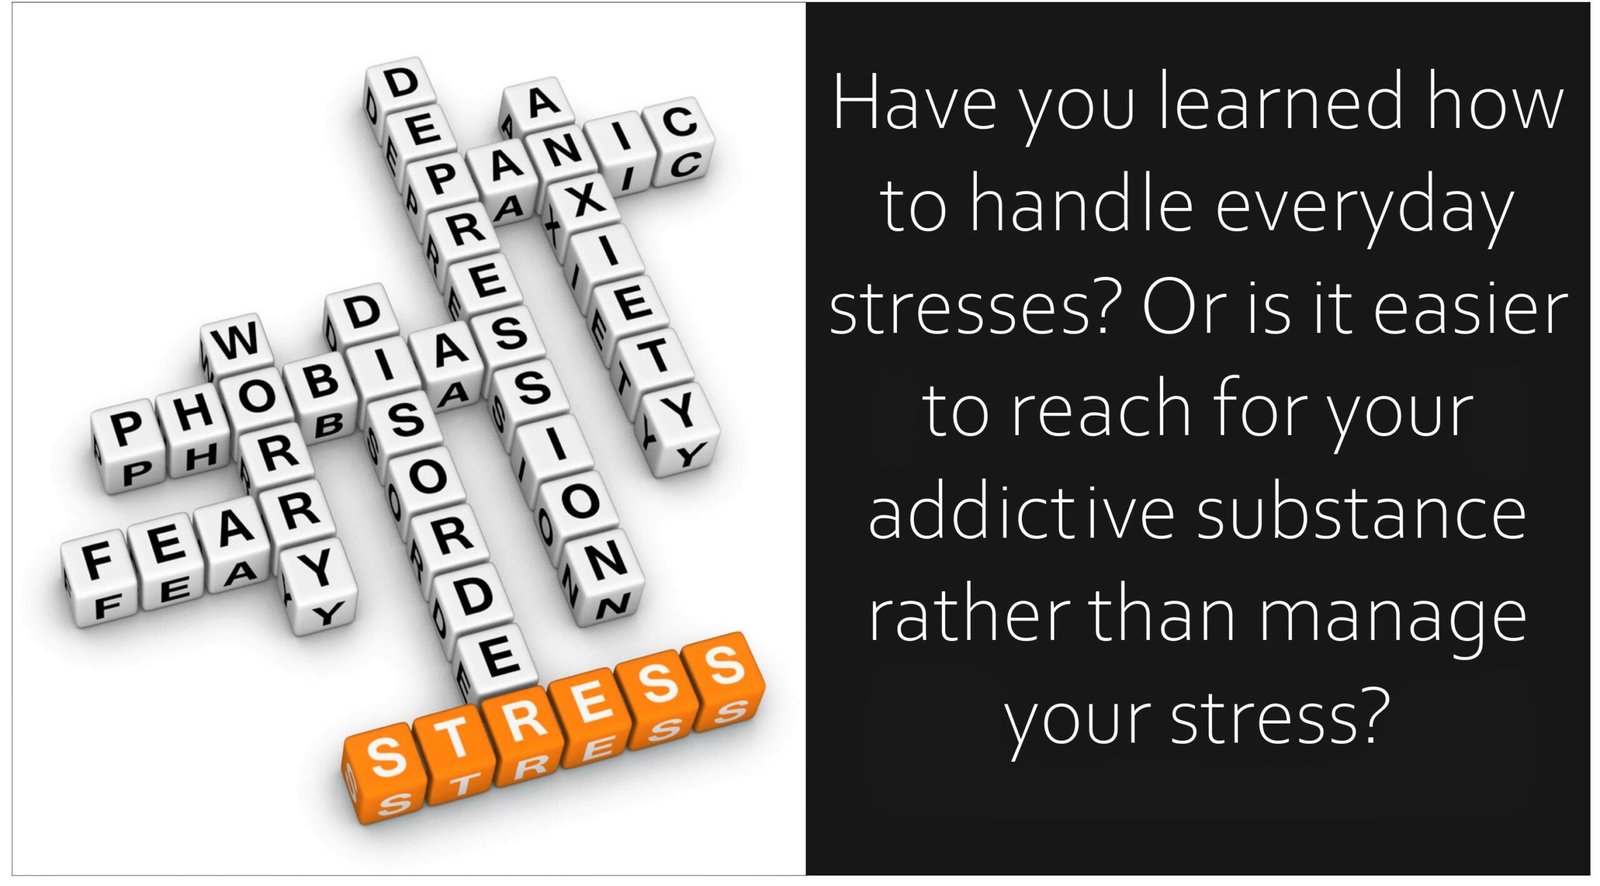 Have you learned how to handle everyday stresses